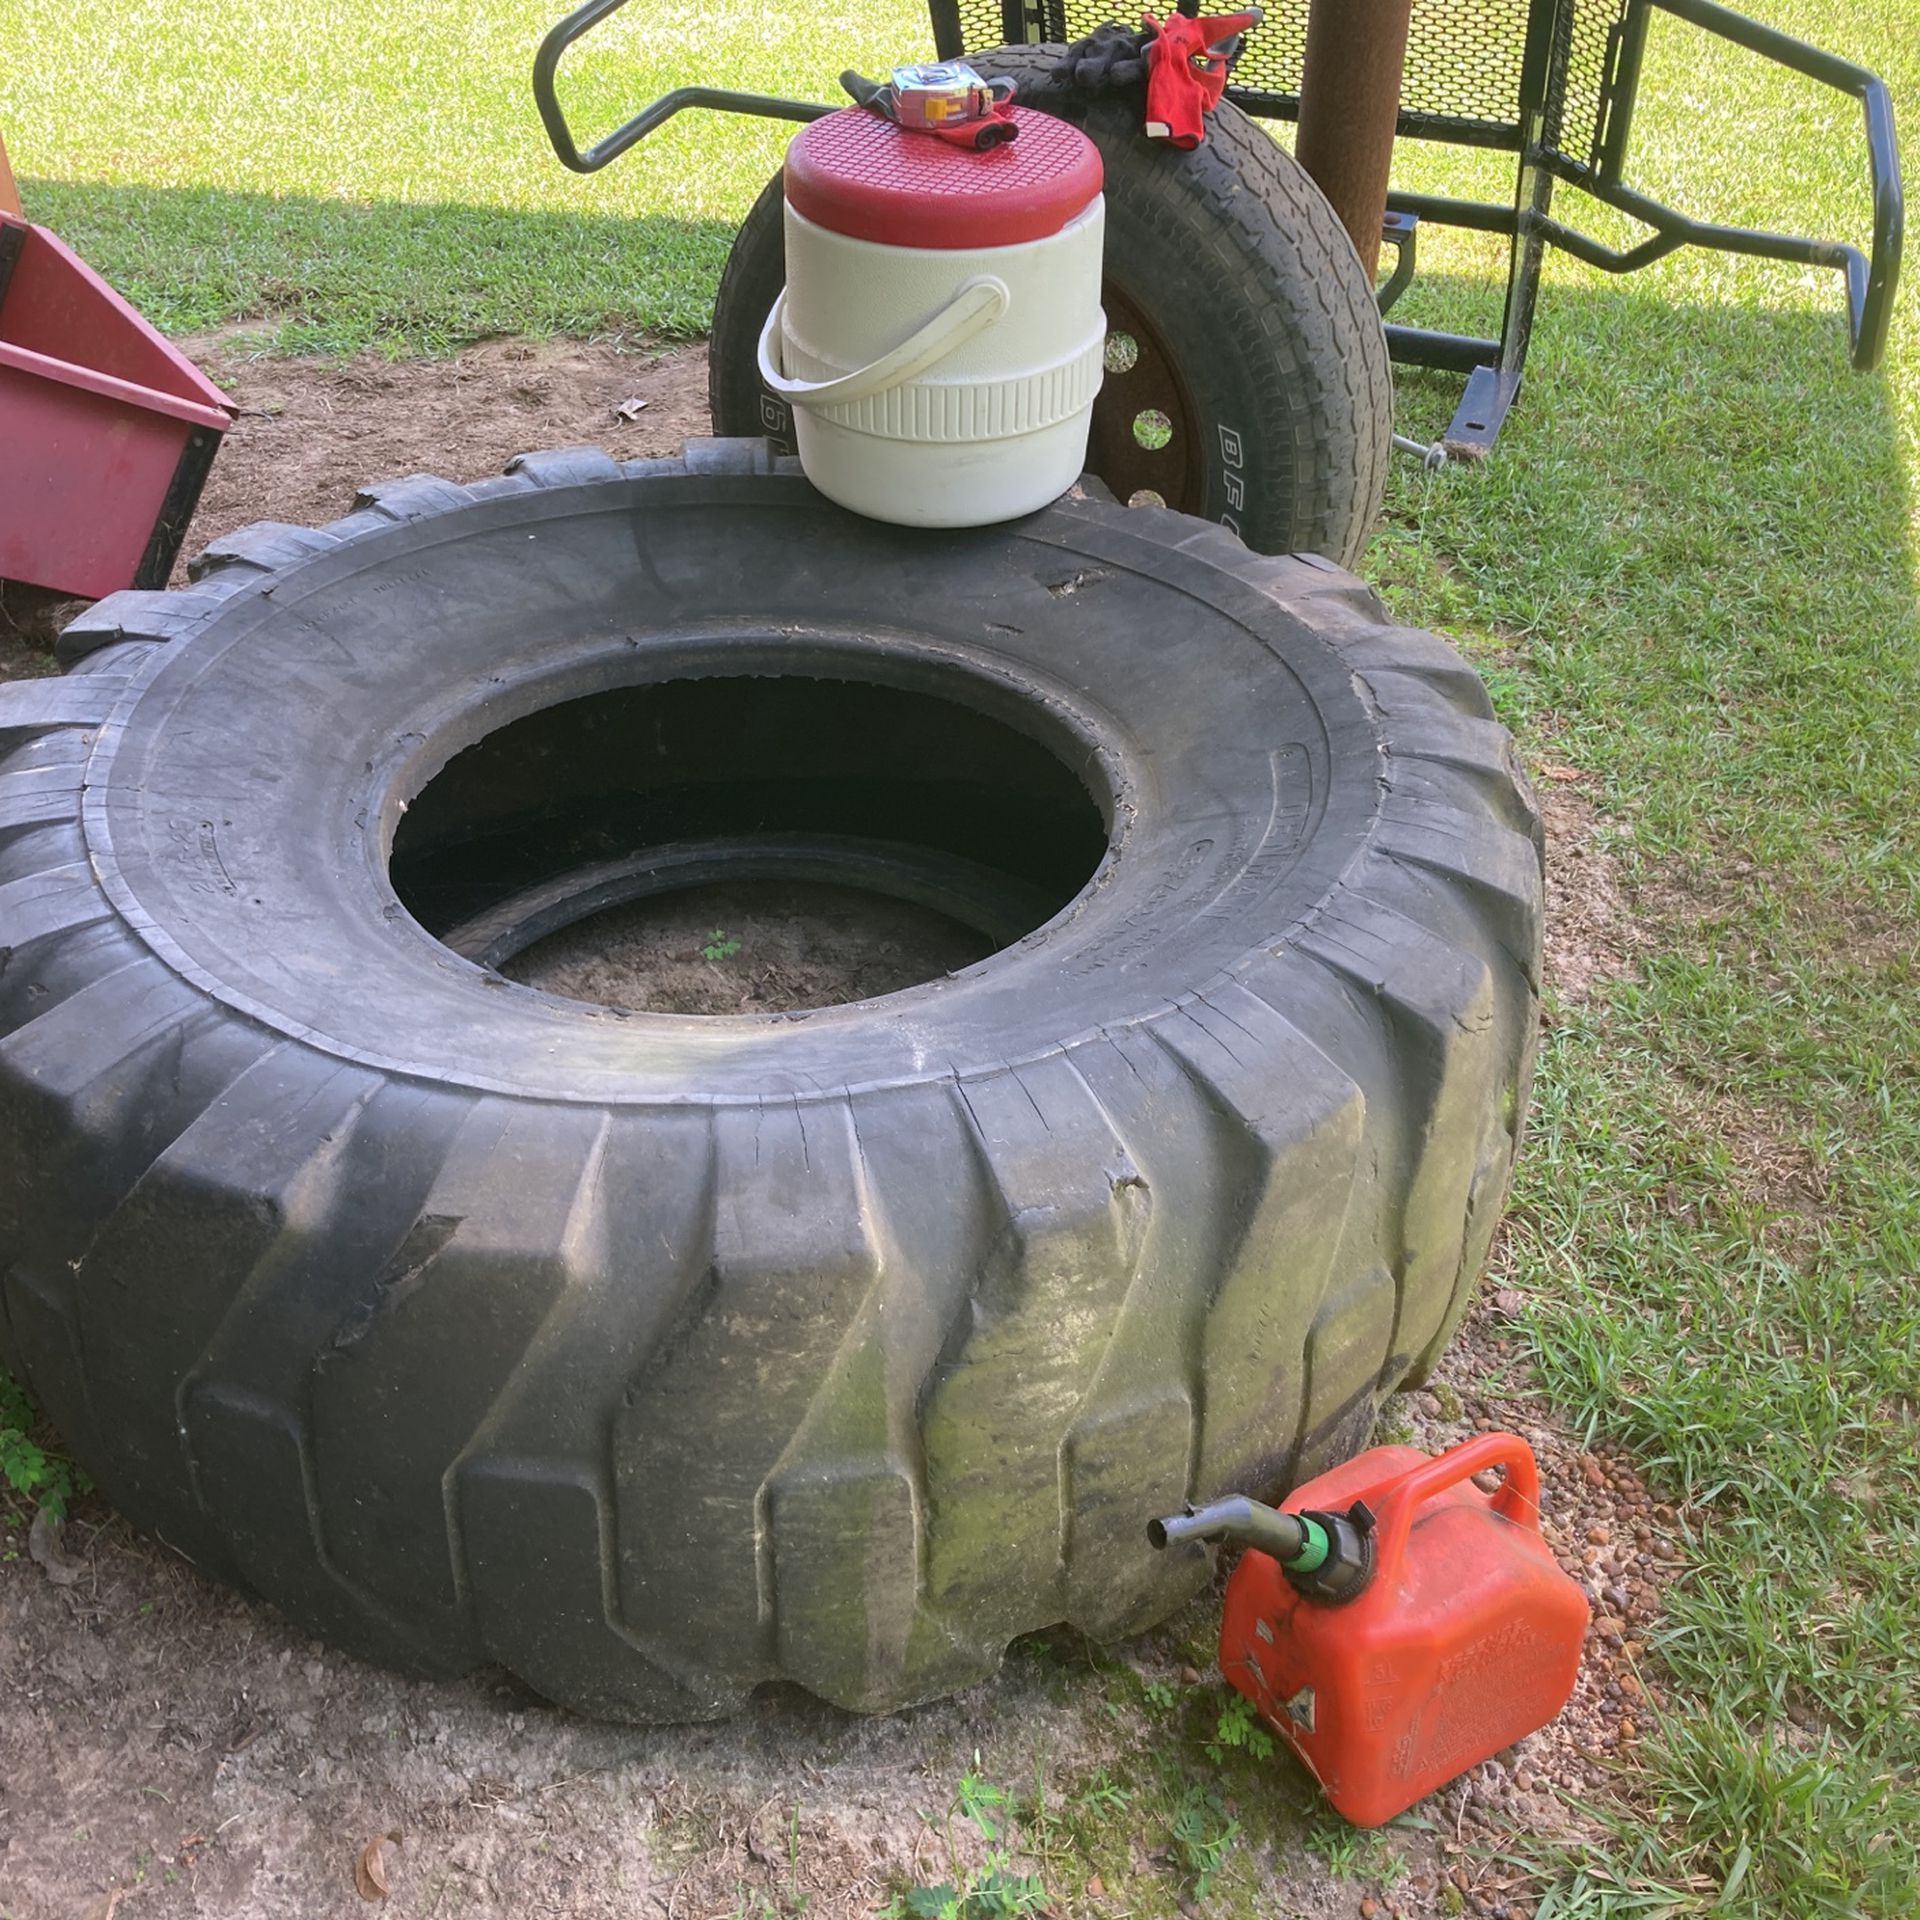 Free Workout Tire, 54” Diameter Free Just Come And Get It